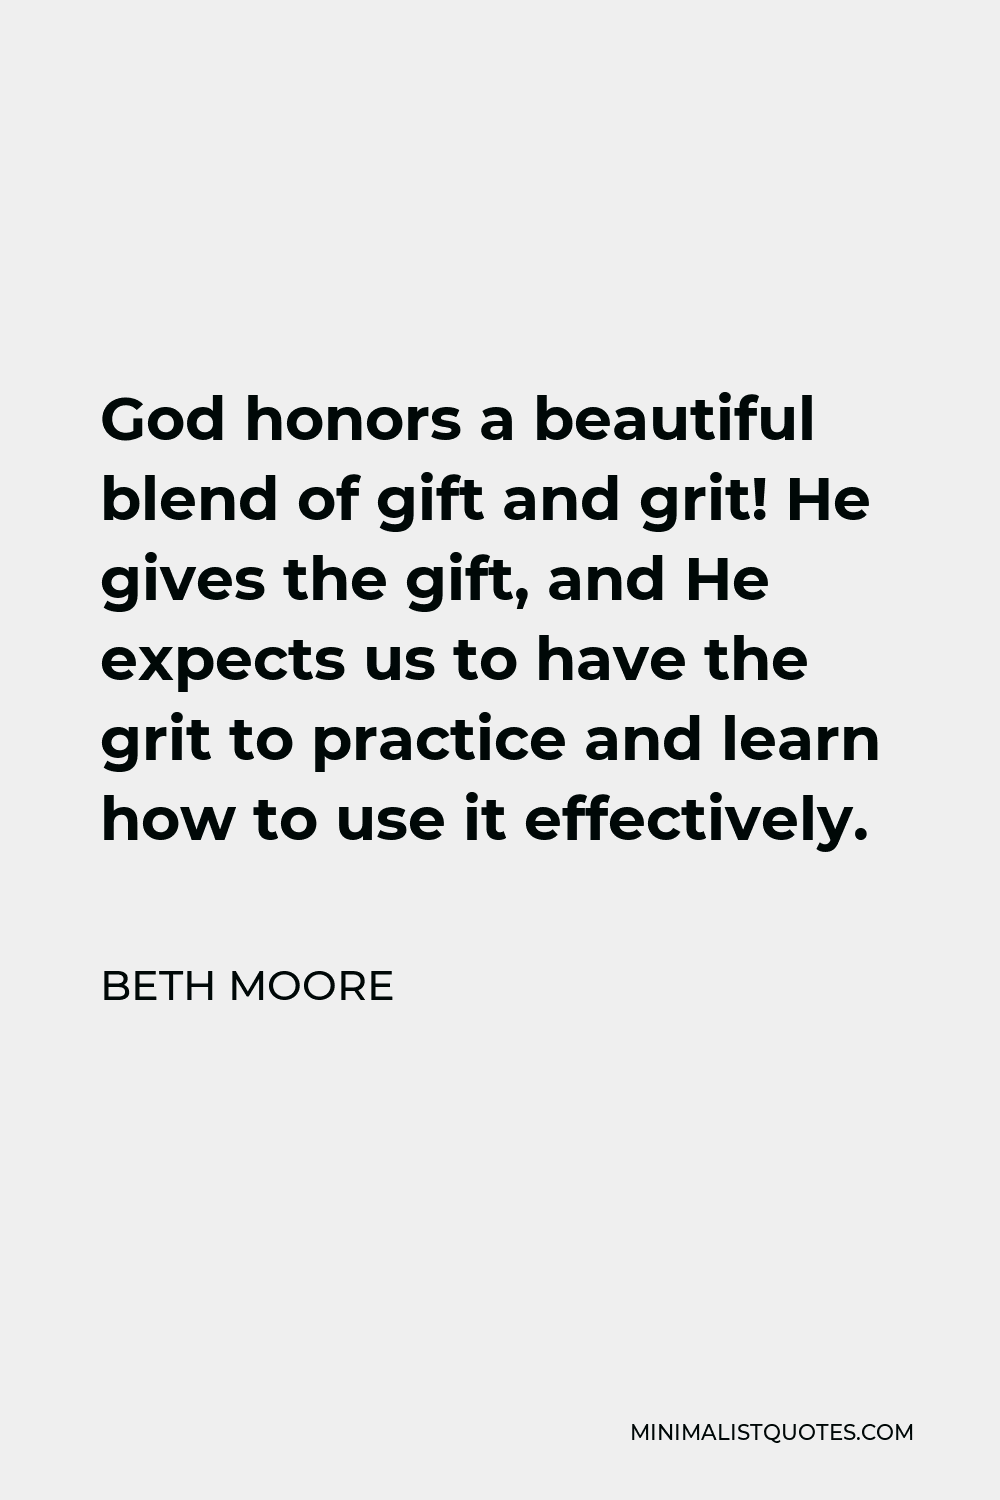 Beth Moore Quote - God honors a beautiful blend of gift and grit! He gives the gift, and He expects us to have the grit to practice and learn how to use it effectively.